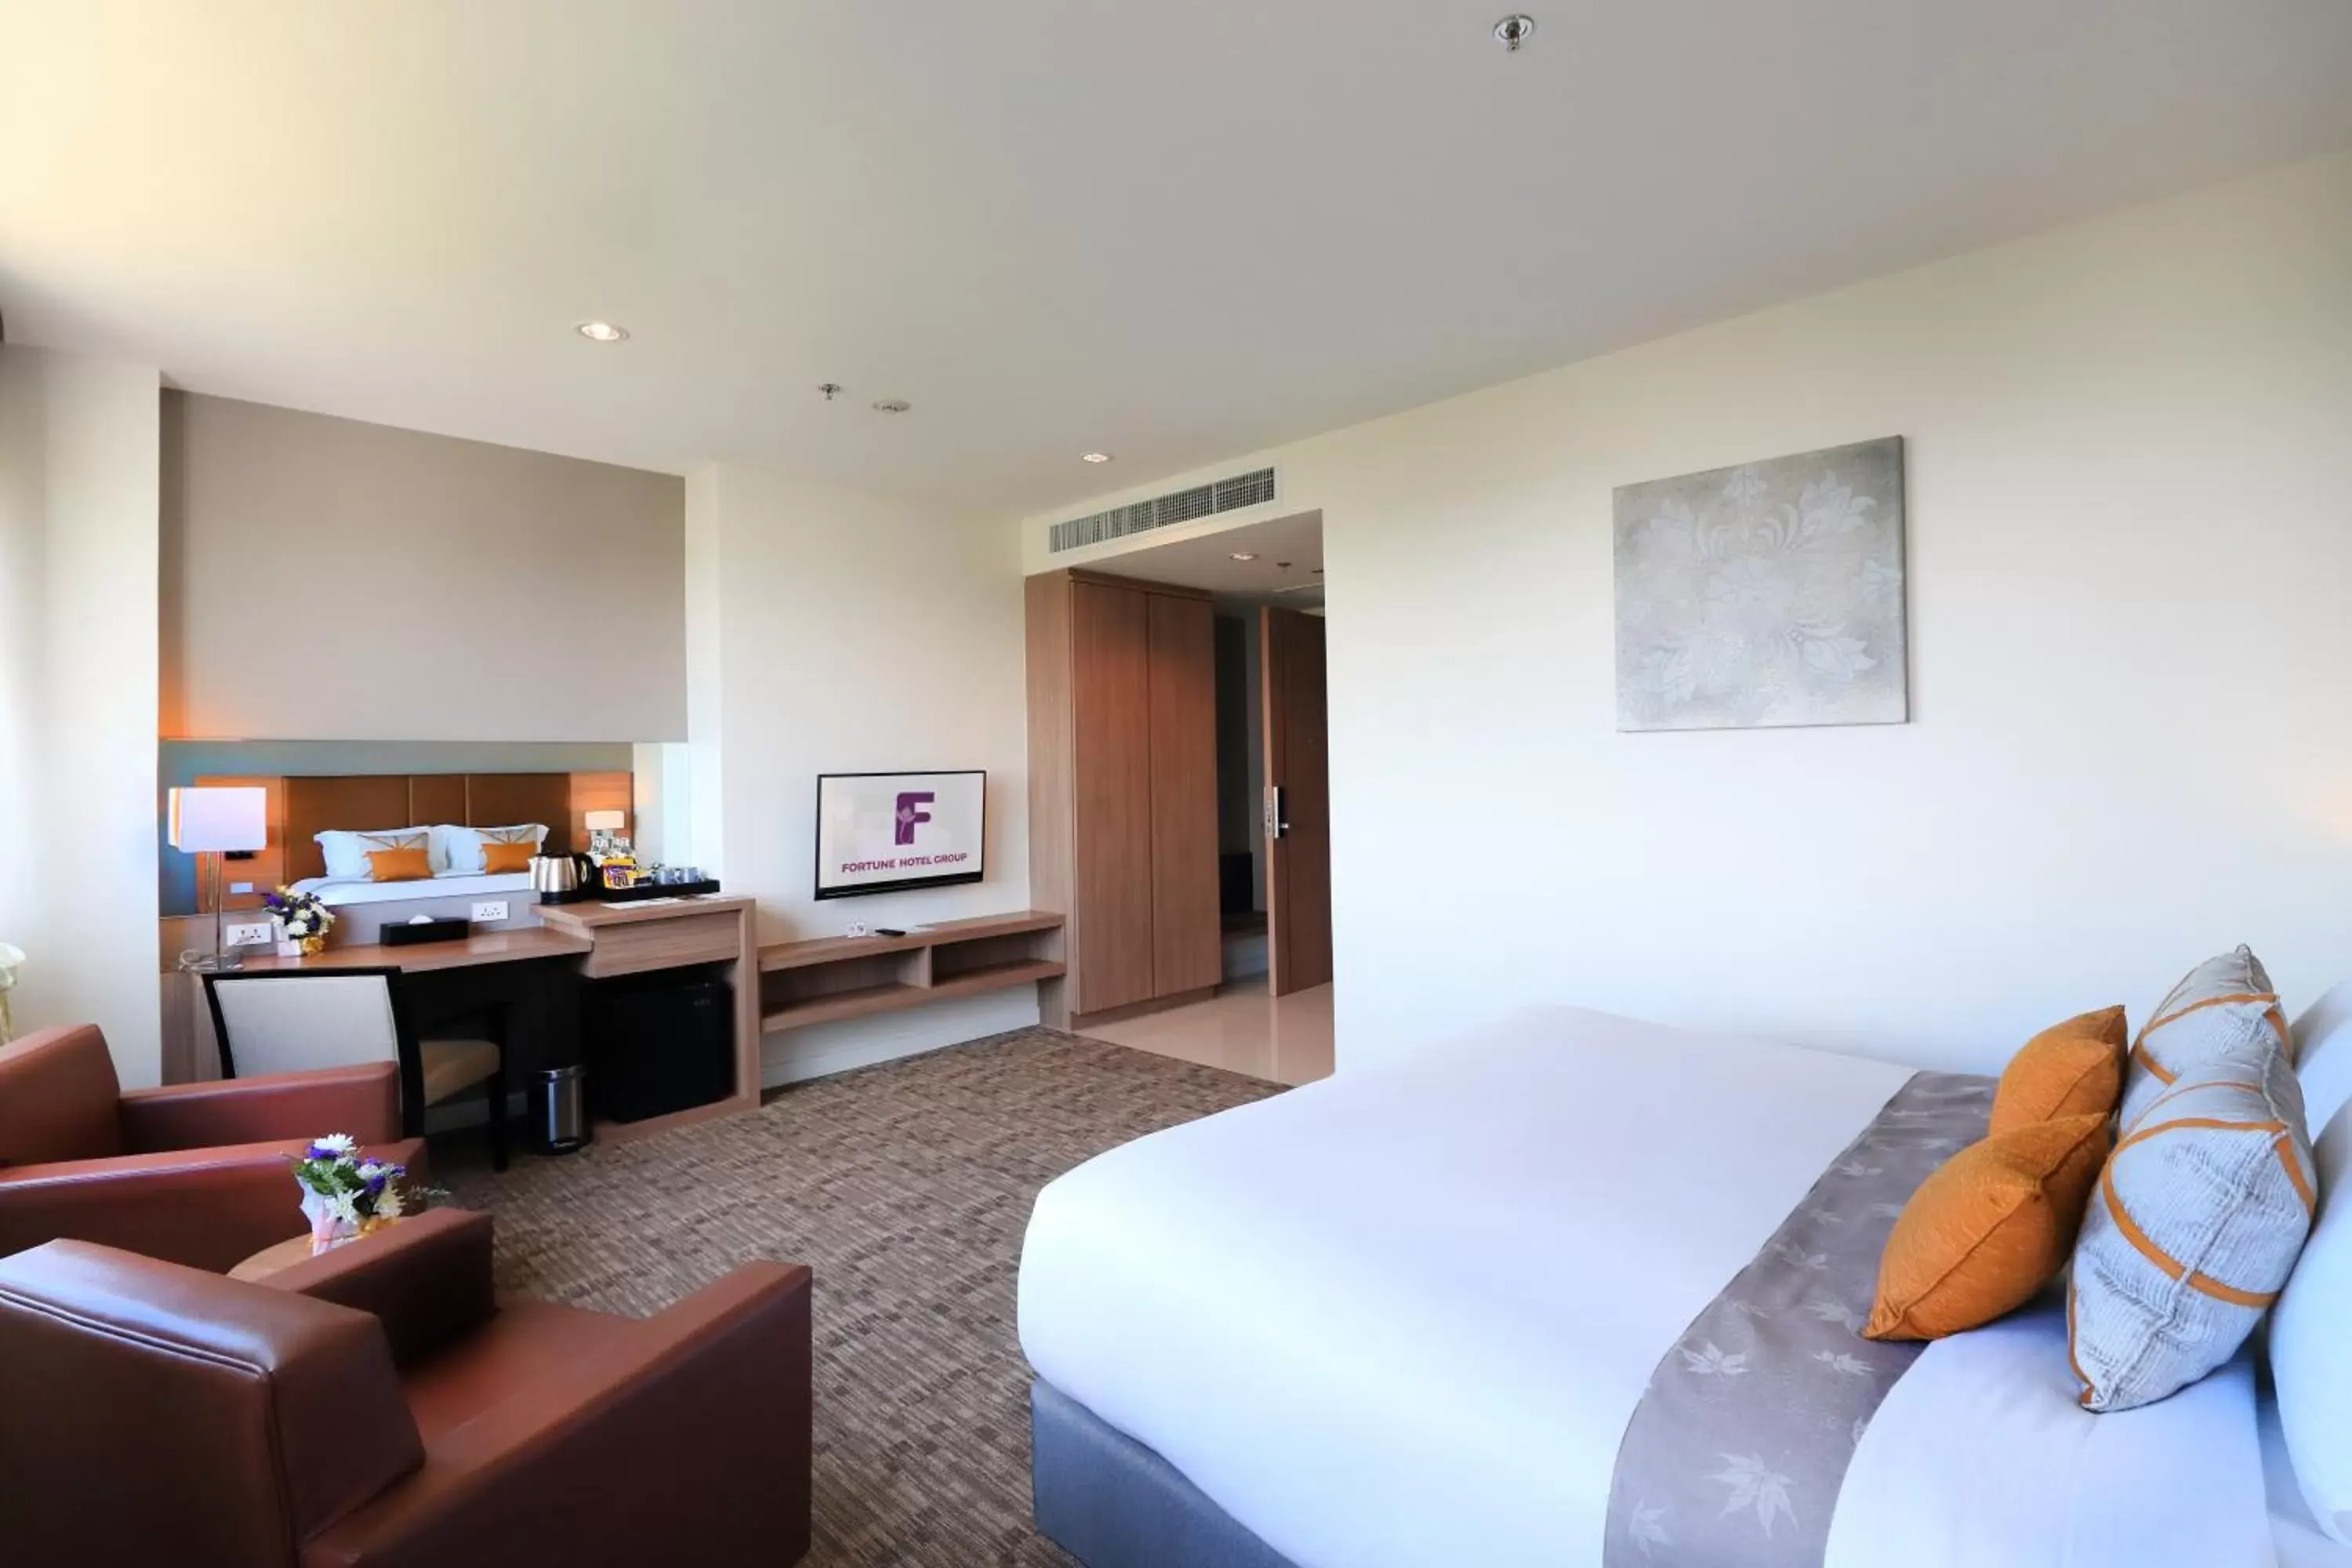 Area and facilities in Grand Fortune Hotel Nakhon Si Thammarat